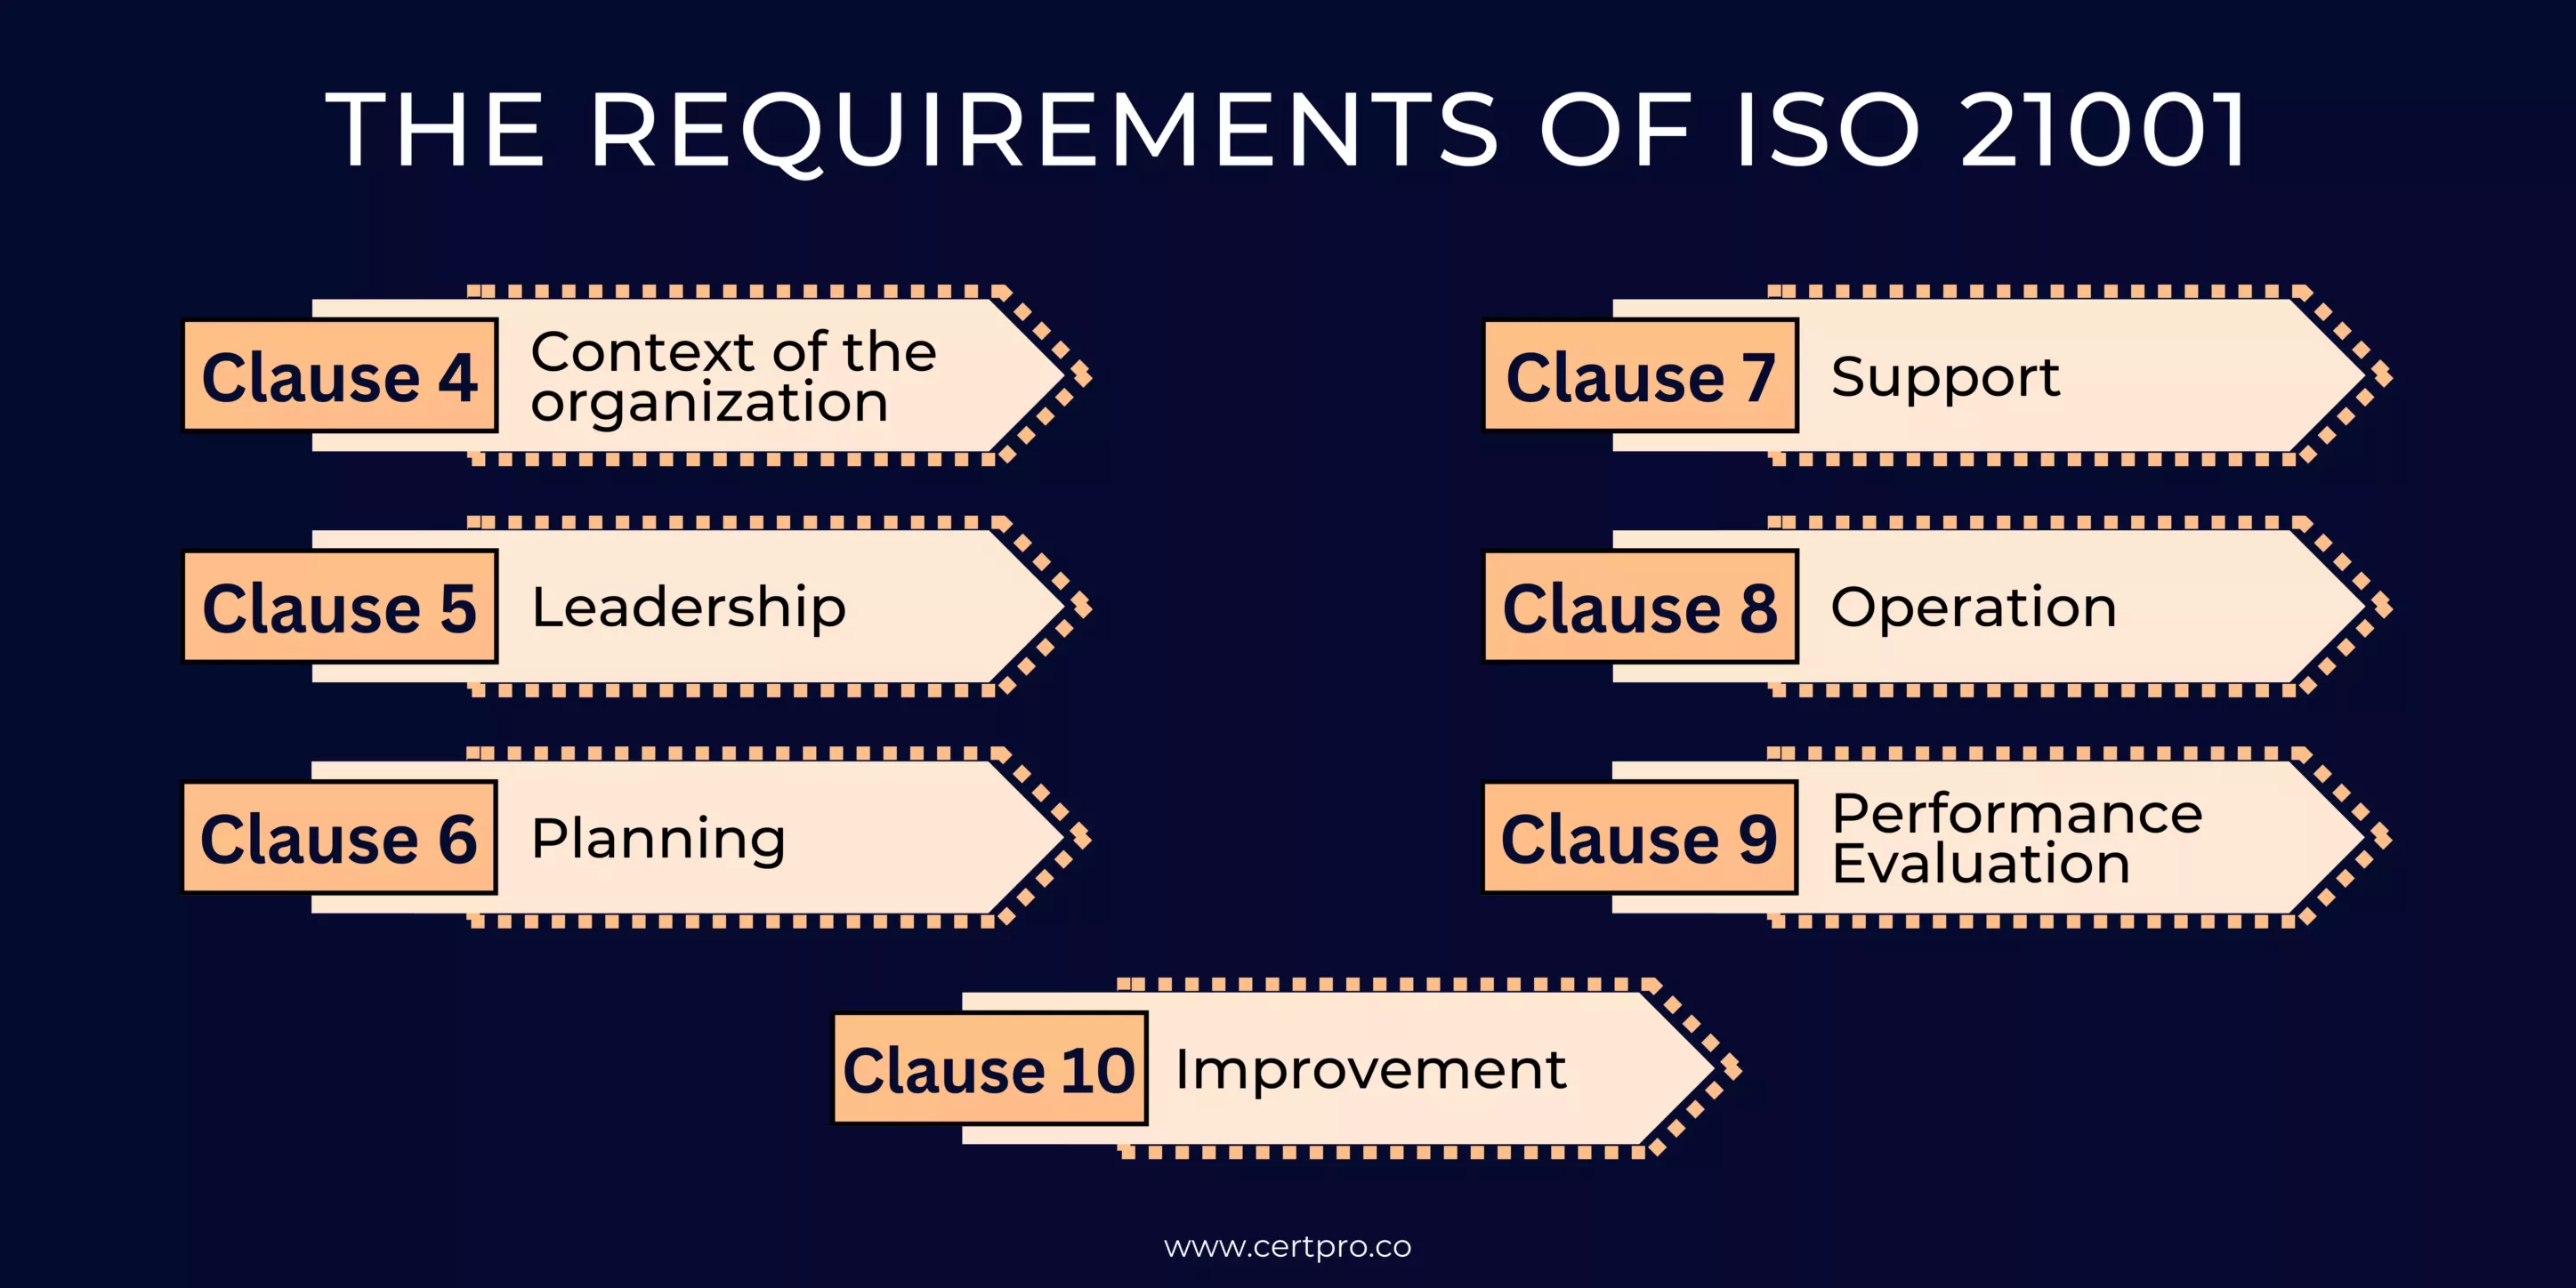 REQUIREMENTS OF ISO 21001